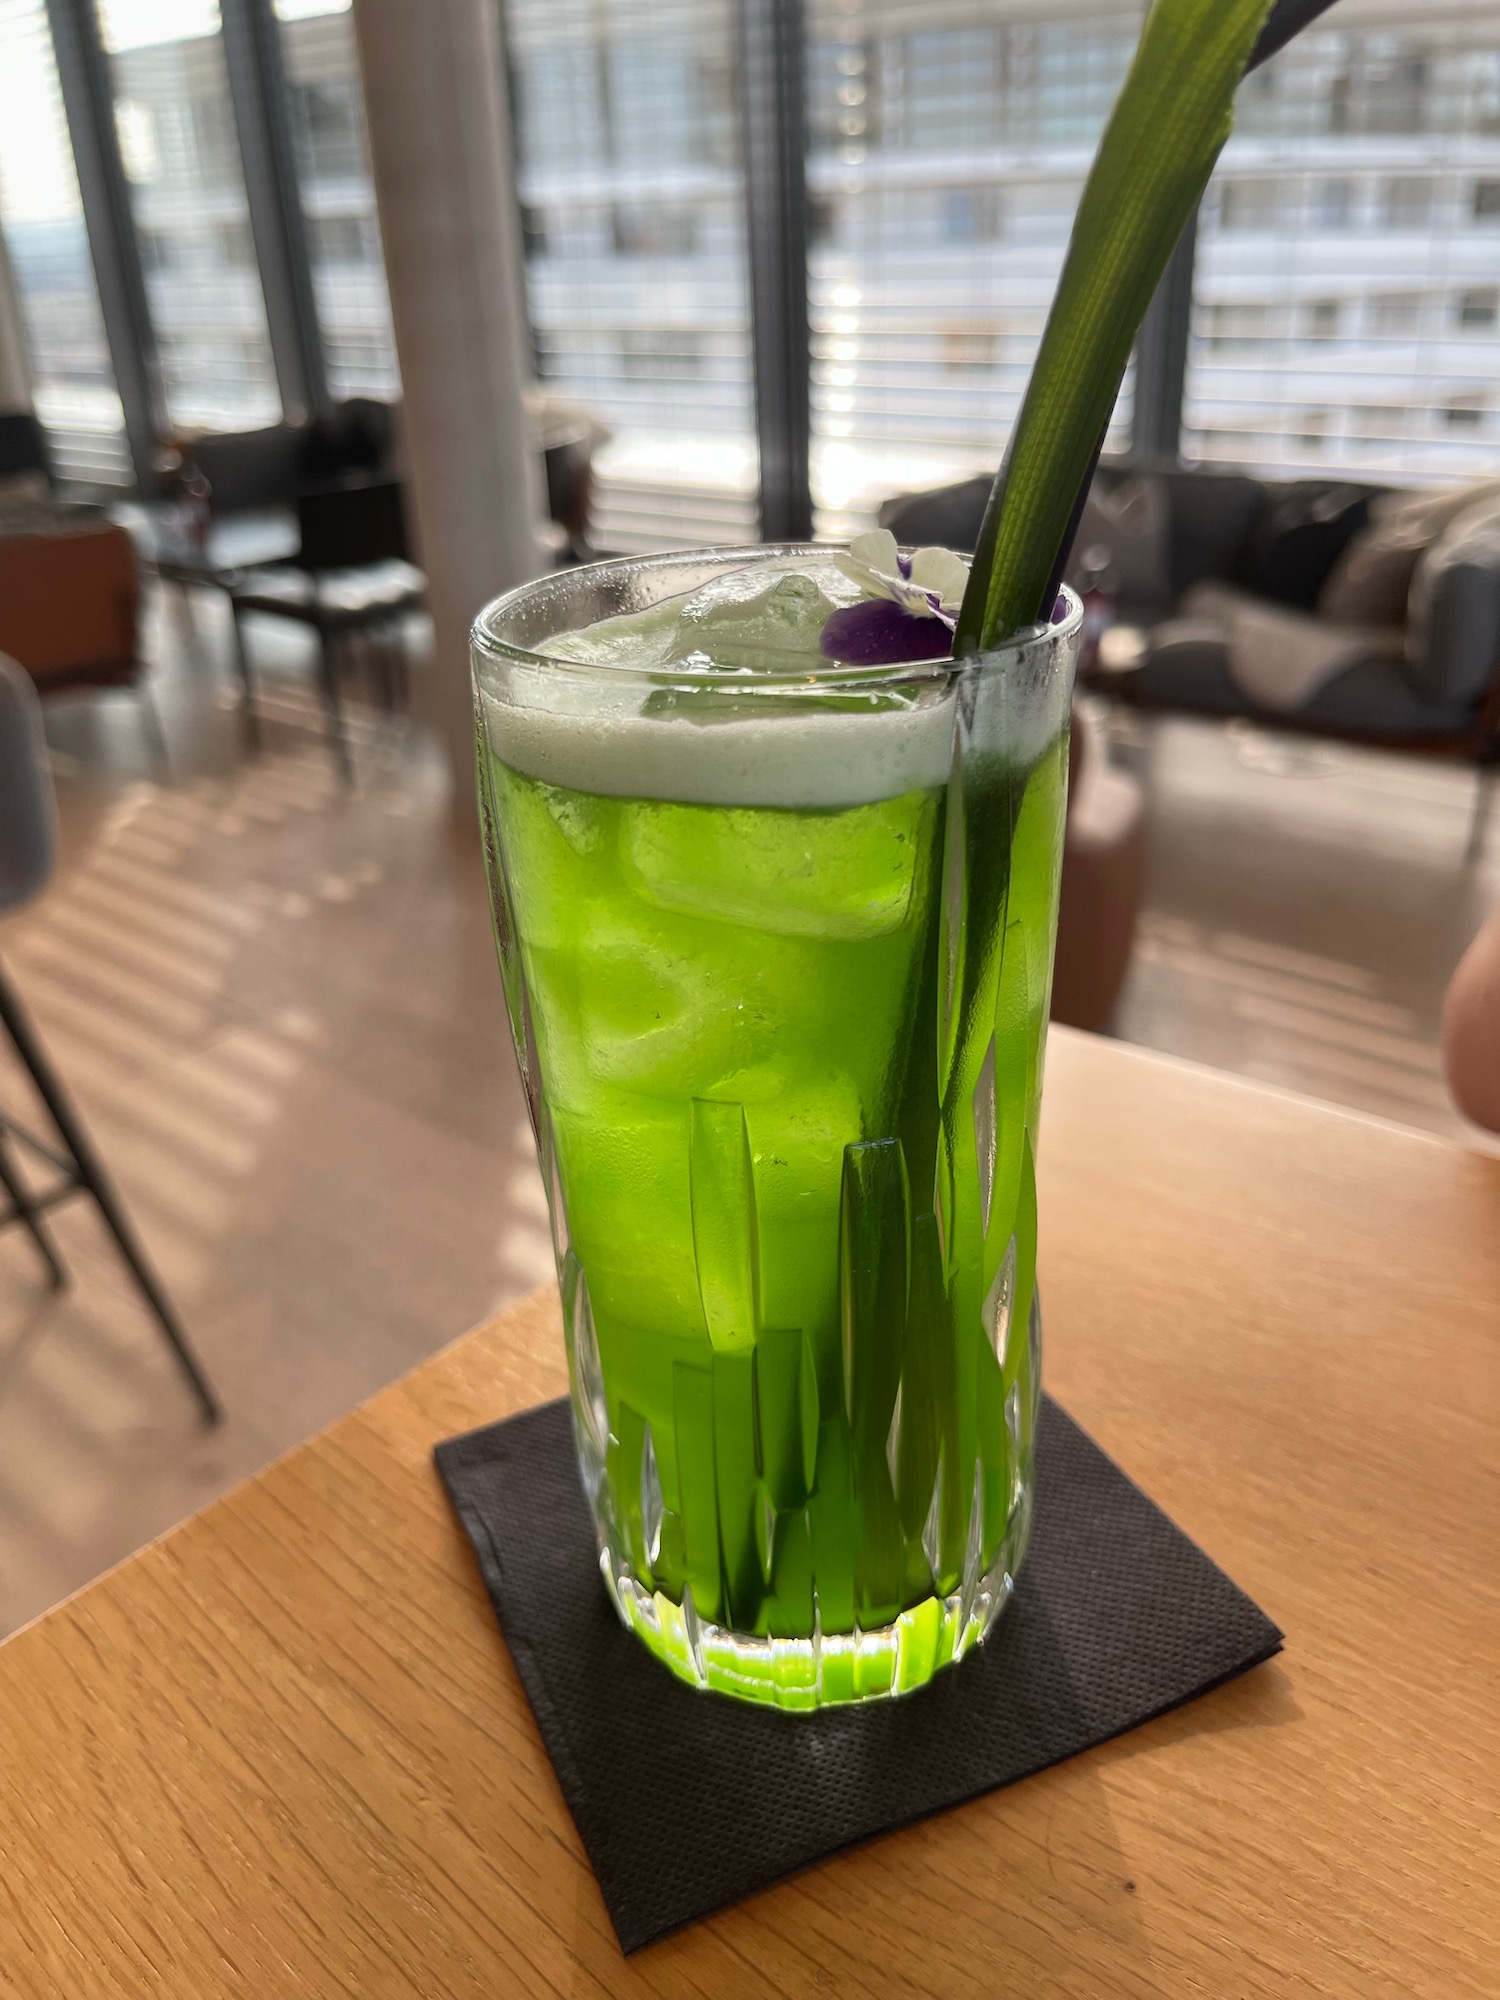 a glass with green liquid and a stem in it